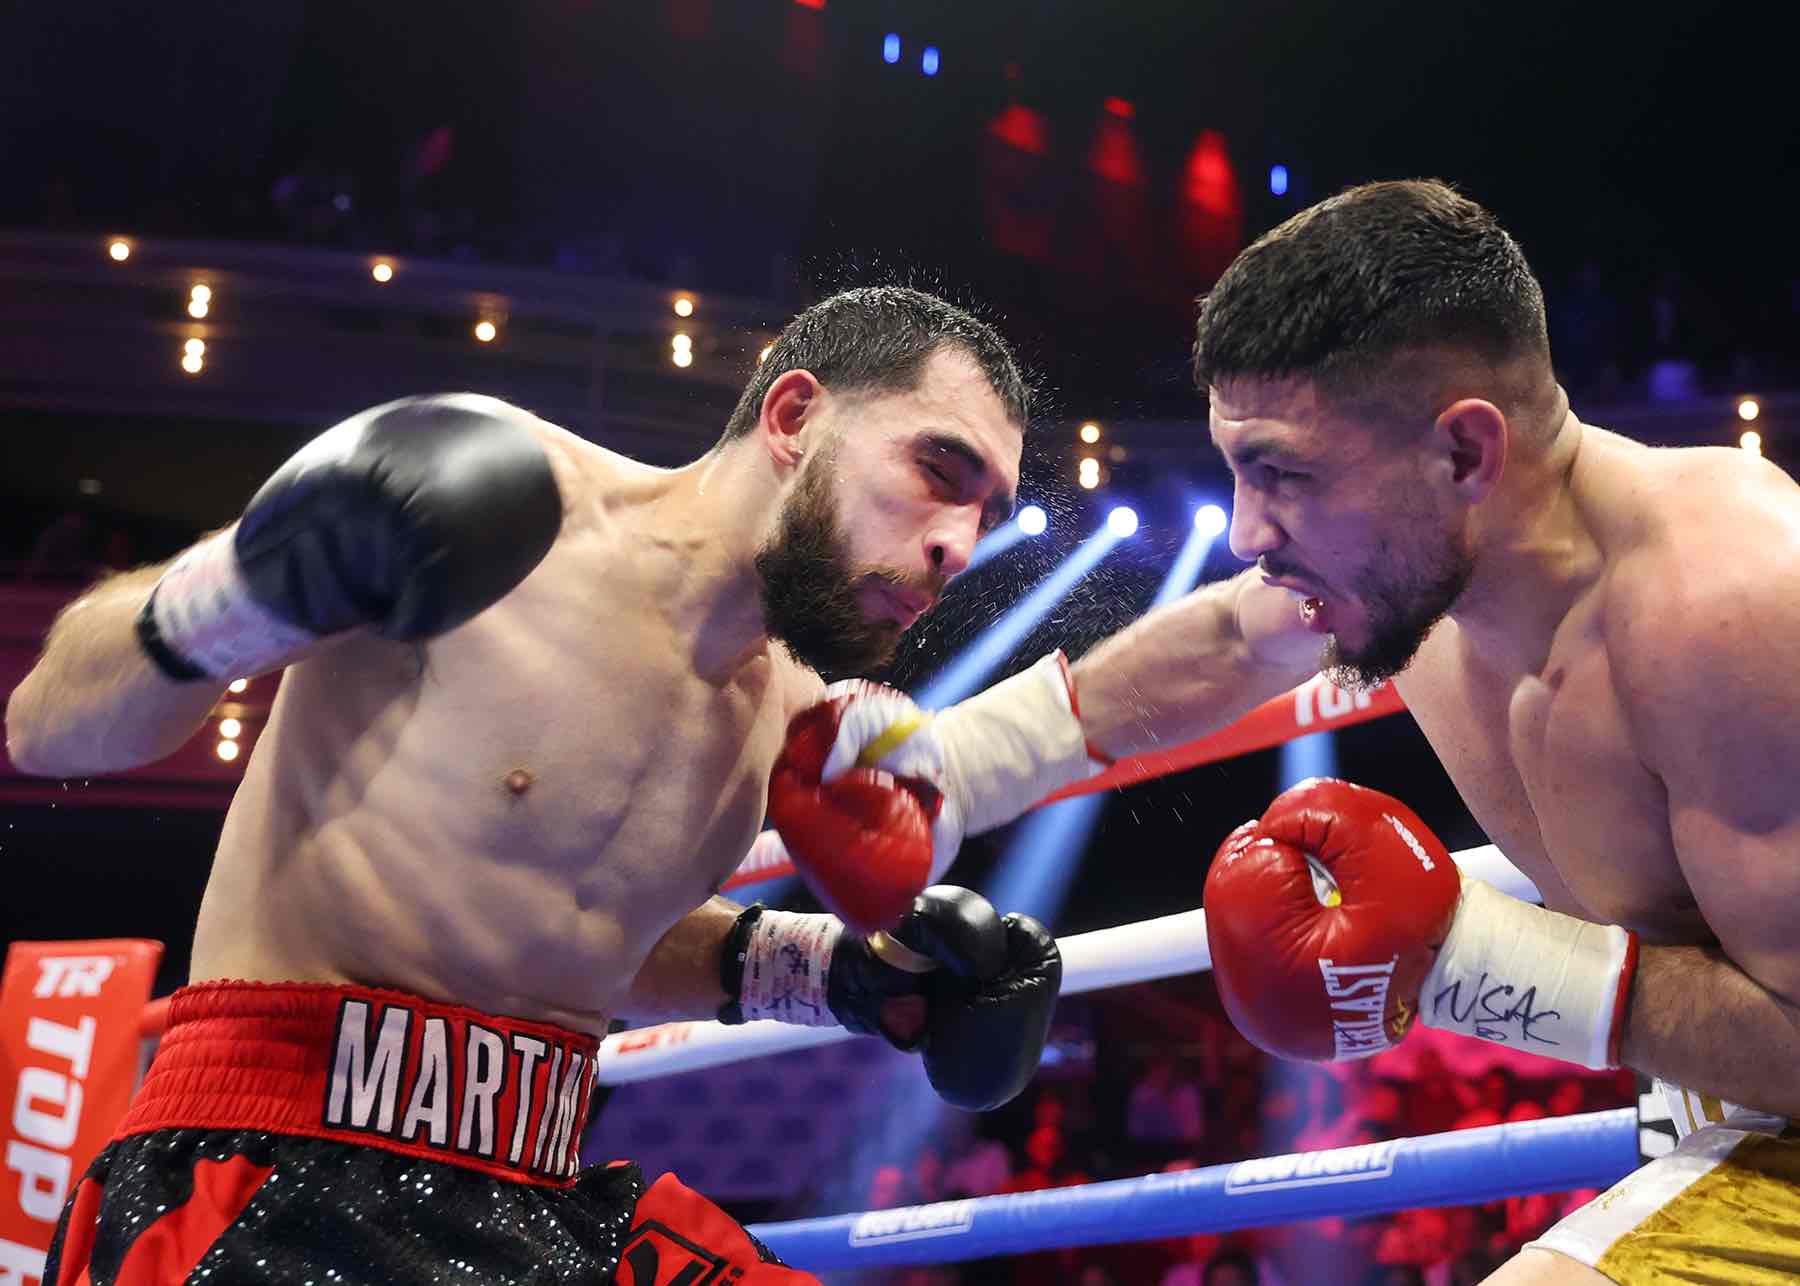 Cortes stops Martinez after Garcia refuses to let him continue